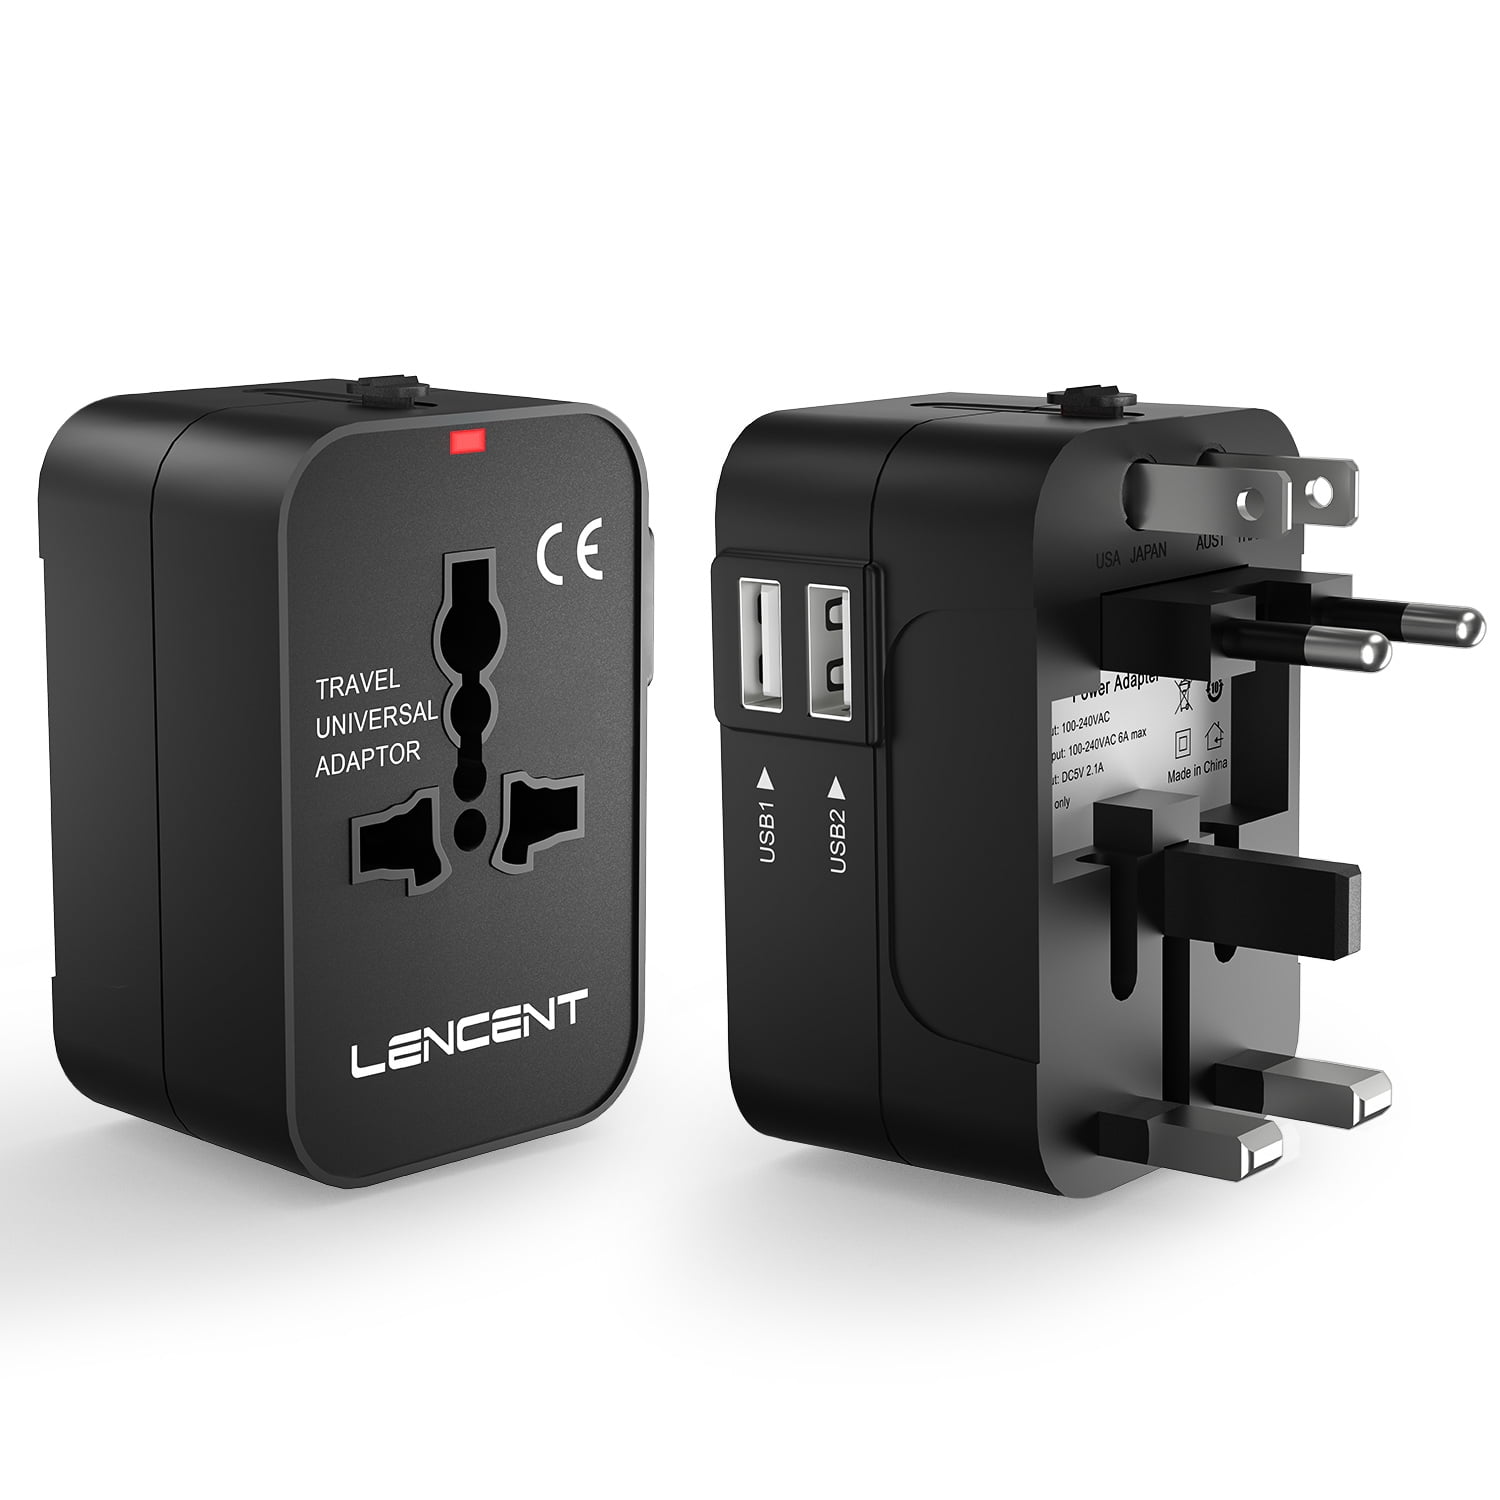 Universal Travel Adapter, LENCENT All in One International Power Adapter Charger Dual Ports for UK Europe Australia China over 200+ Countries in the World - Walmart.com